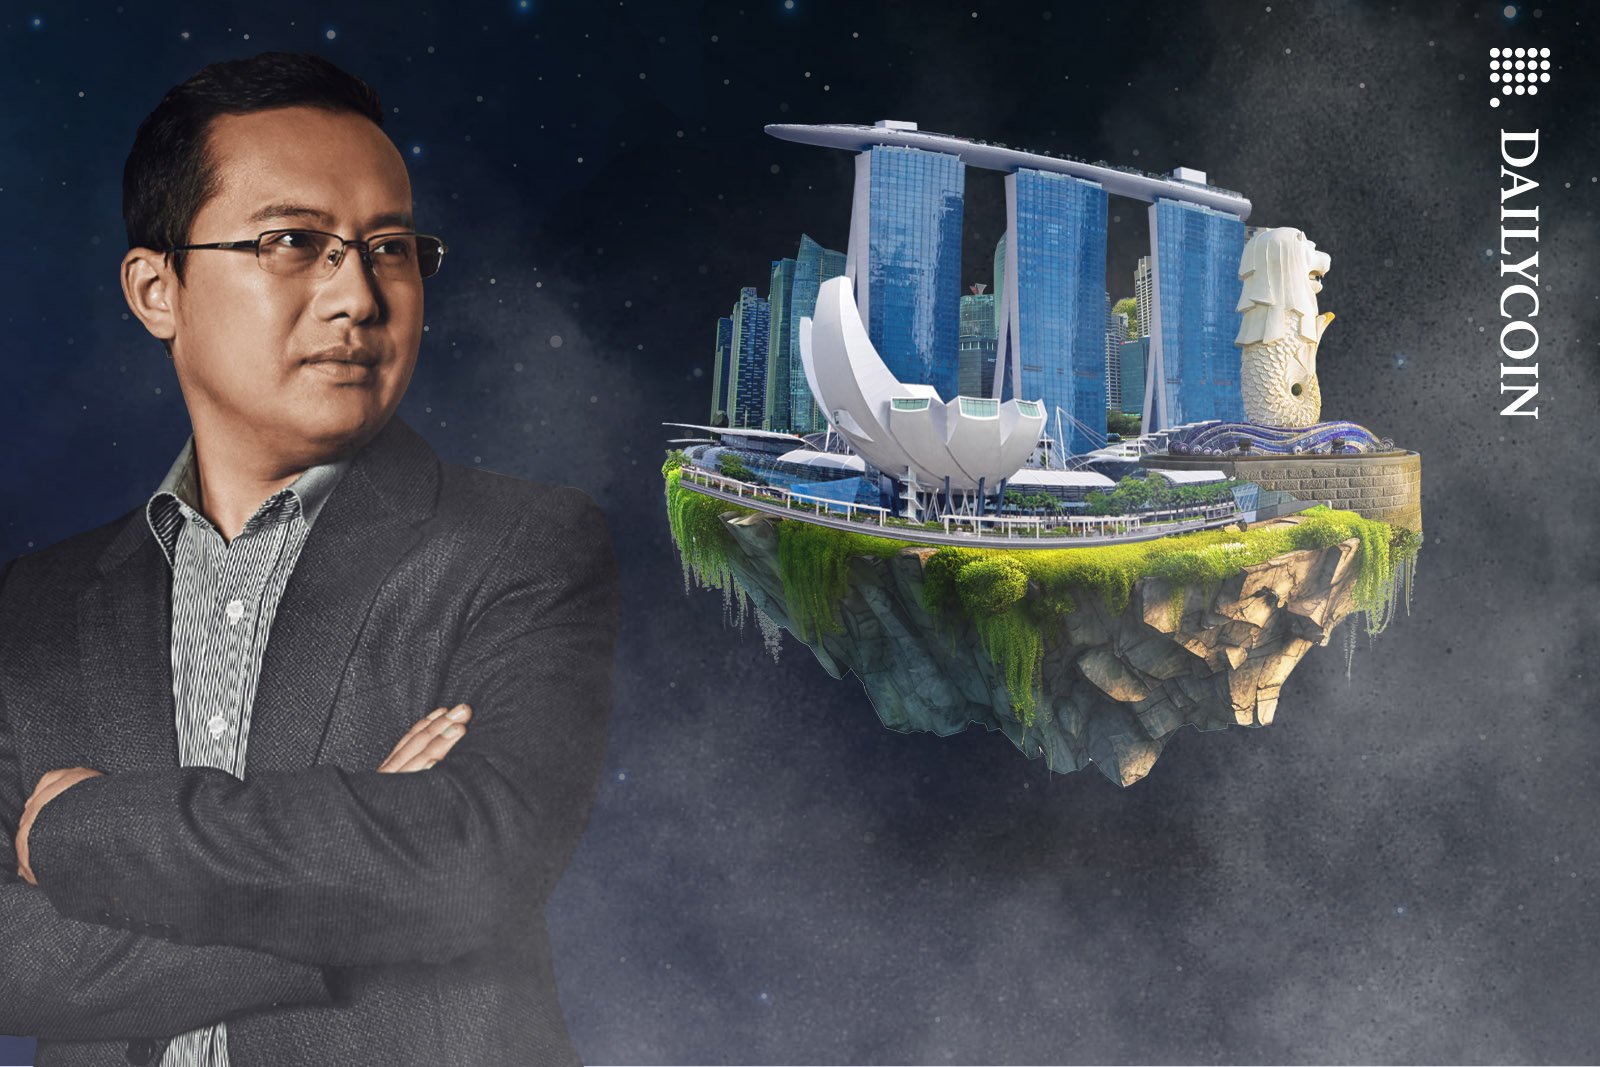 Star Xu smiling as he is looking at a floating island resembling Singapore.